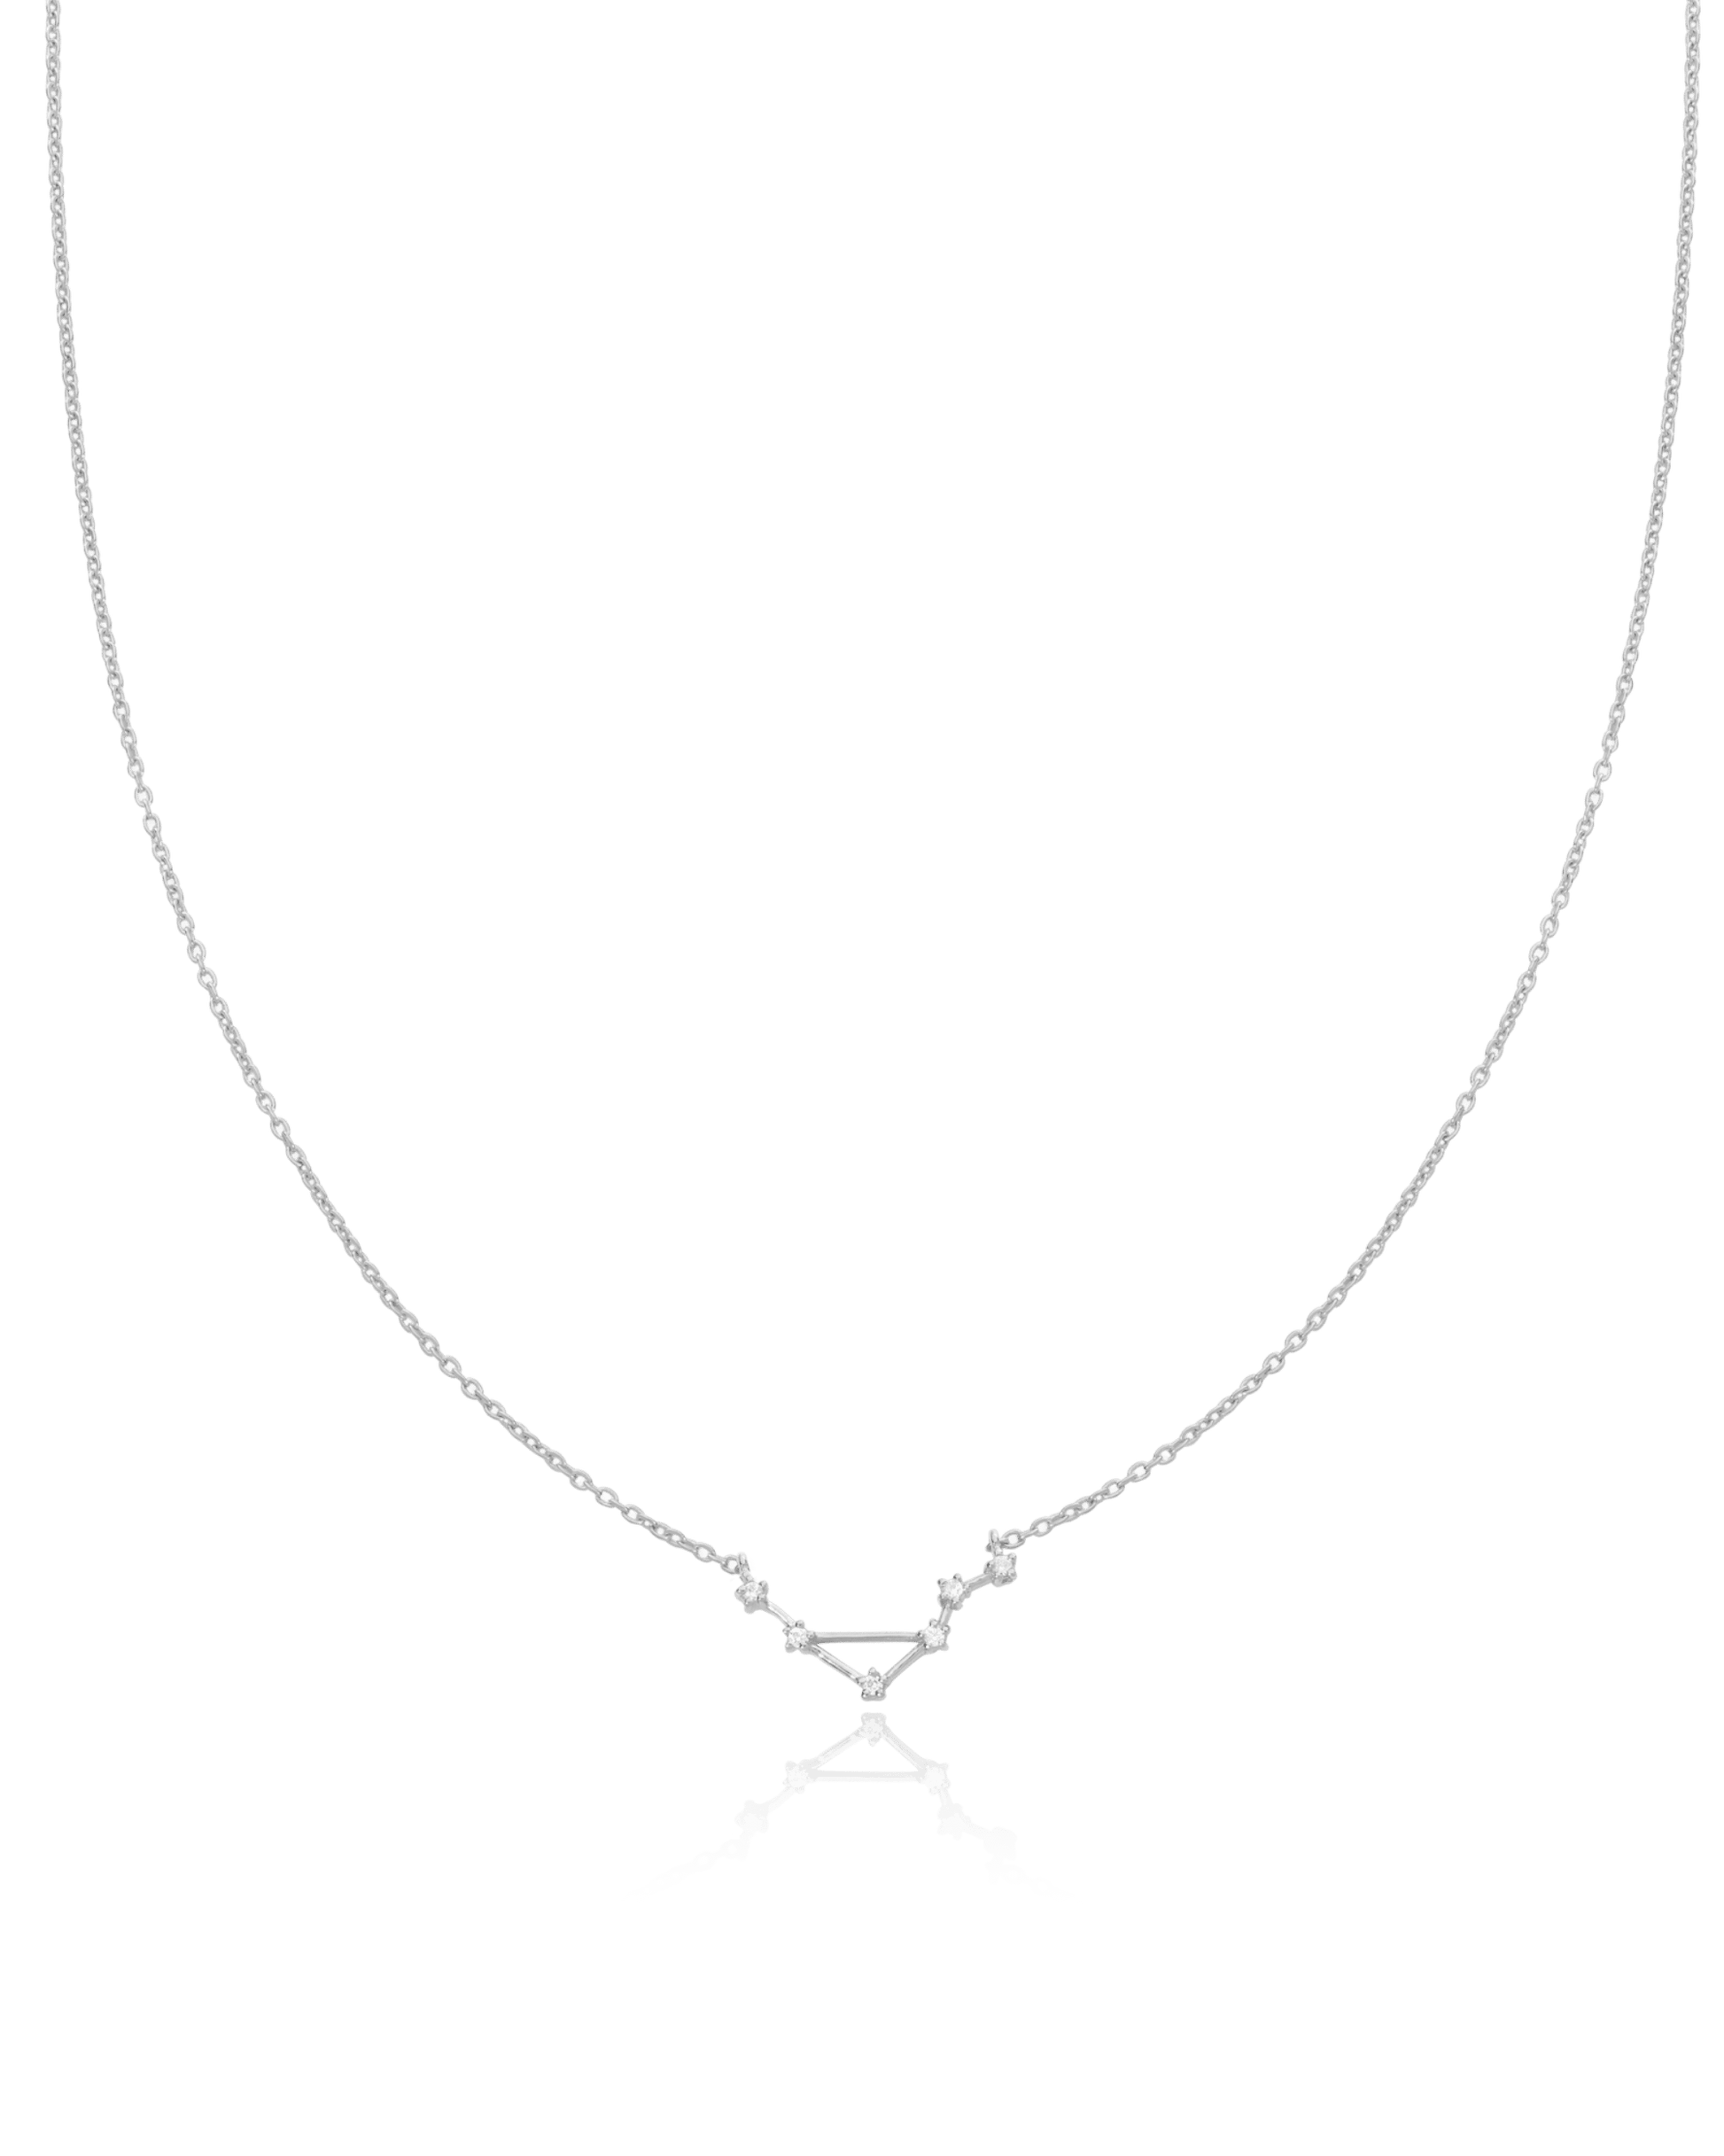 Single Constellation Necklace with Diamonds - 18K Rose Vermeil Necklaces magal-dev 